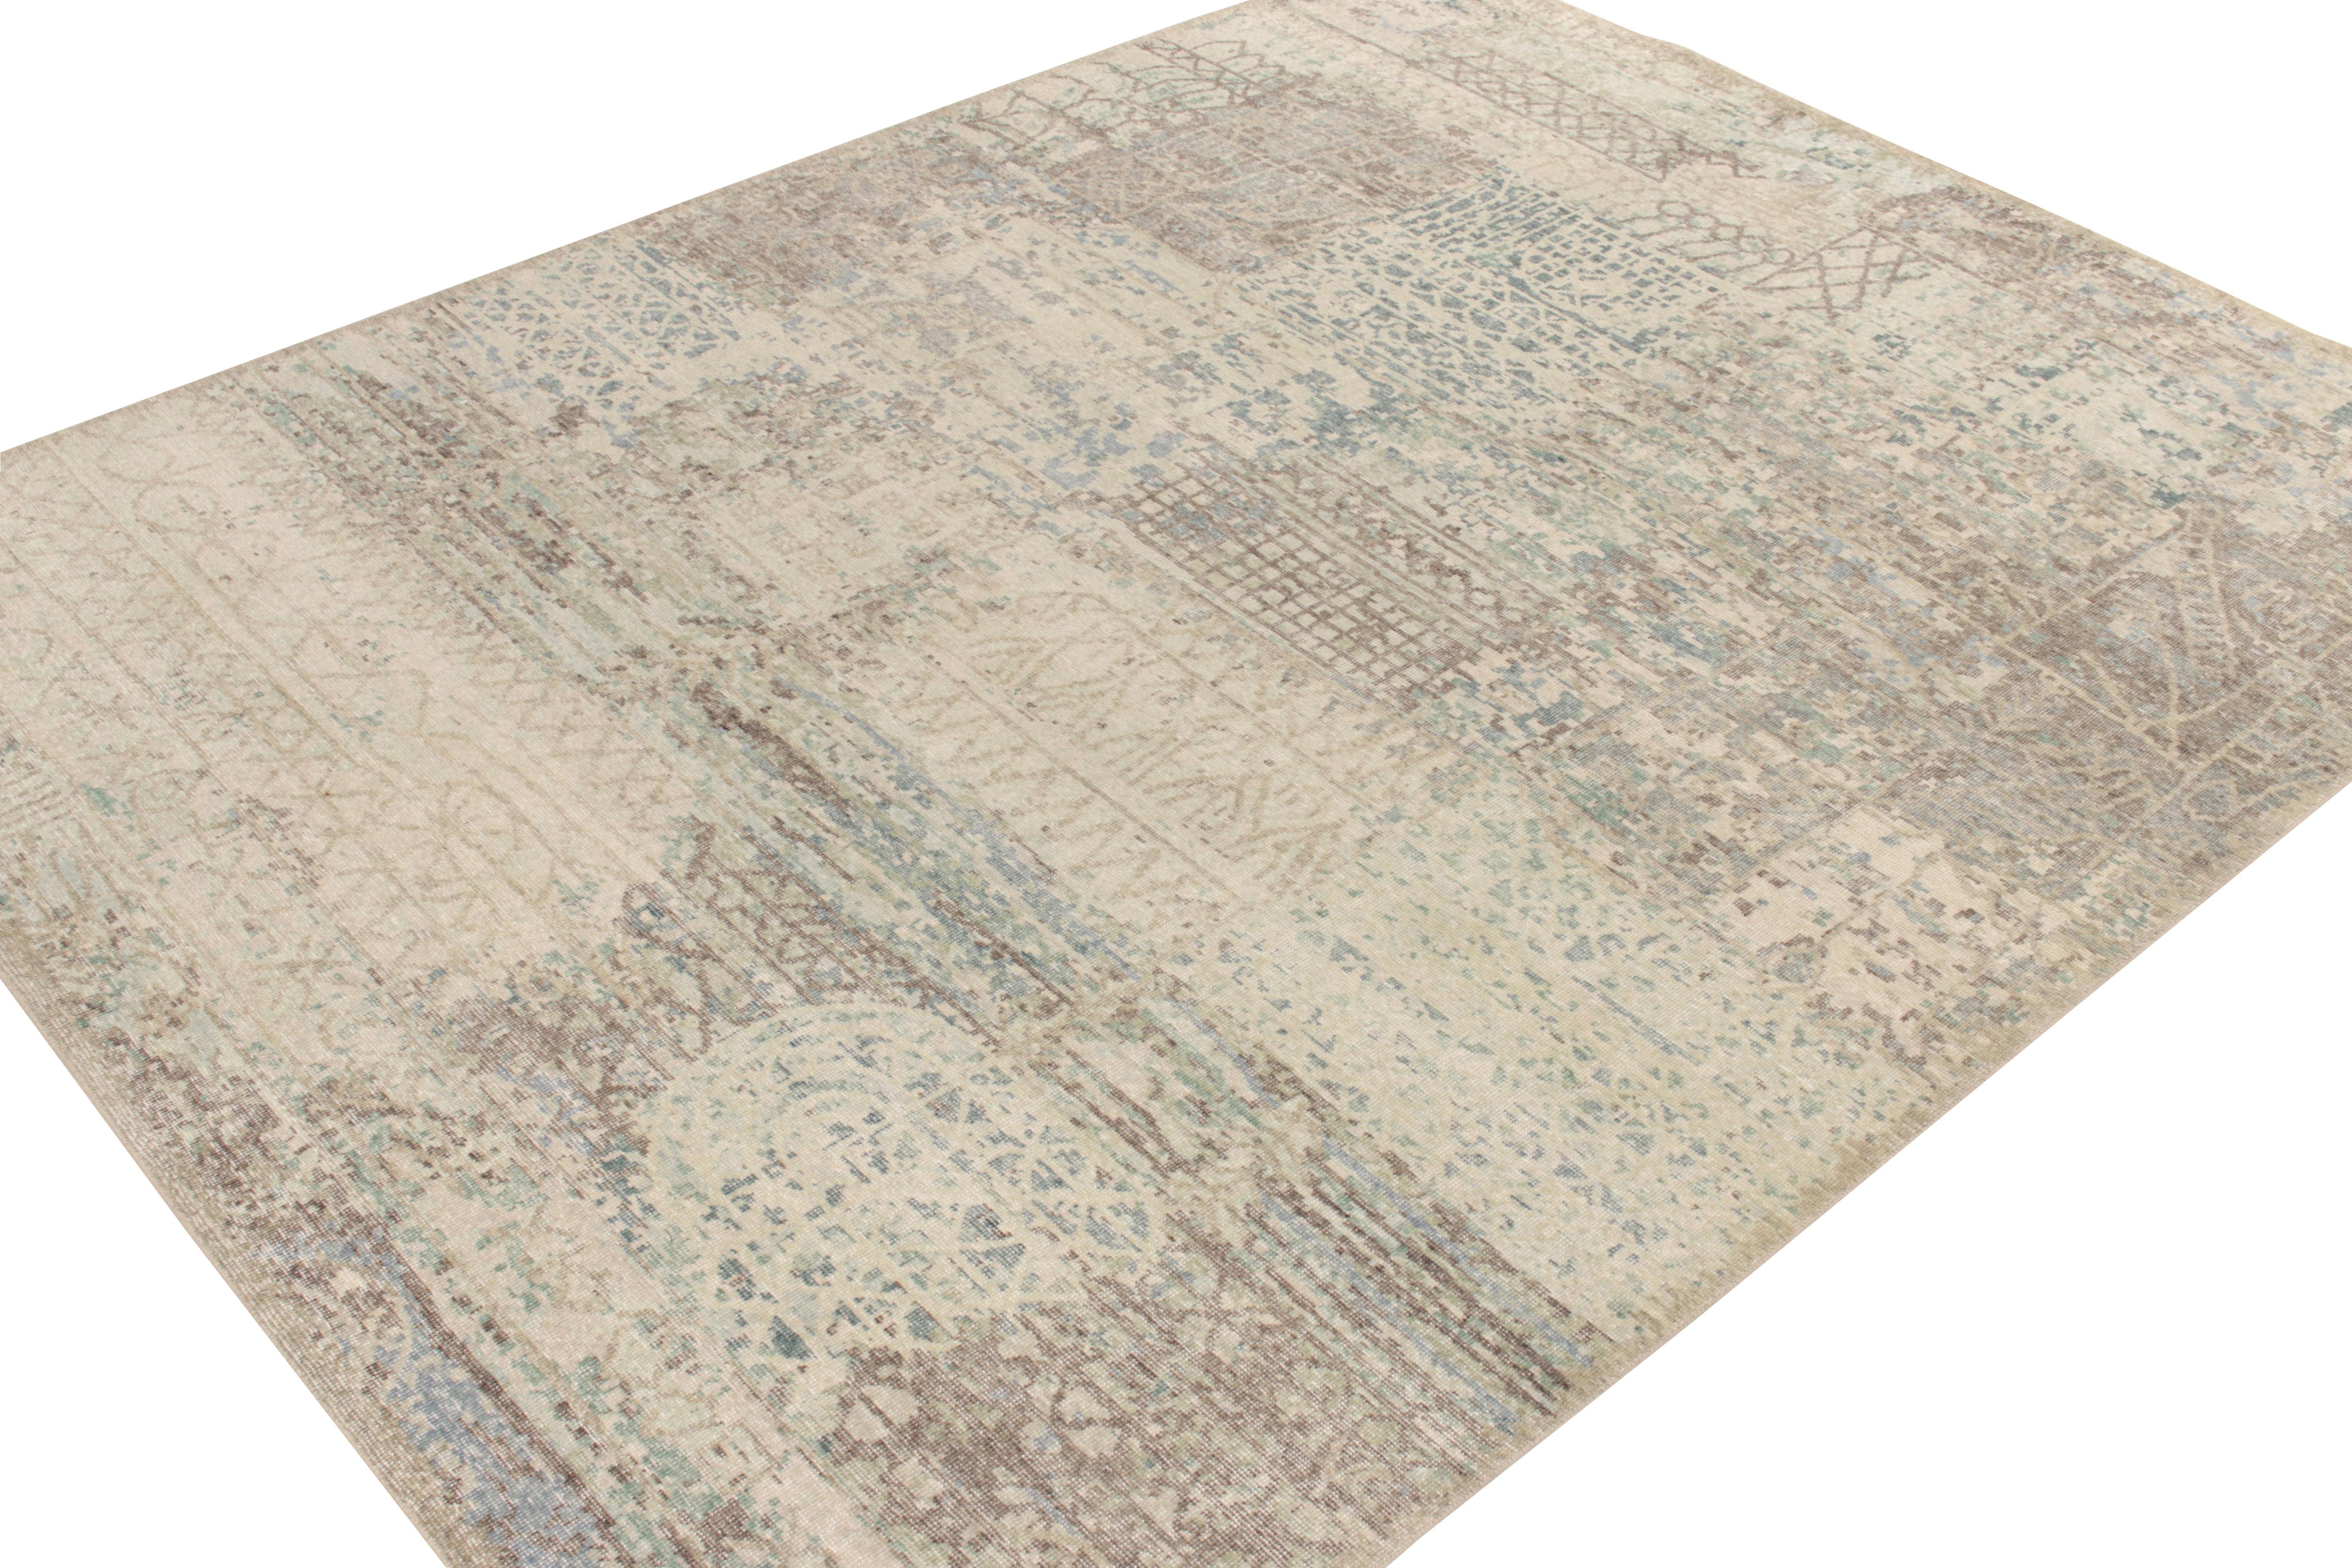 Indian Rug & Kilim's Distressed Style Modern Rug in Silver-Gray, Blue Abstract Pattern For Sale